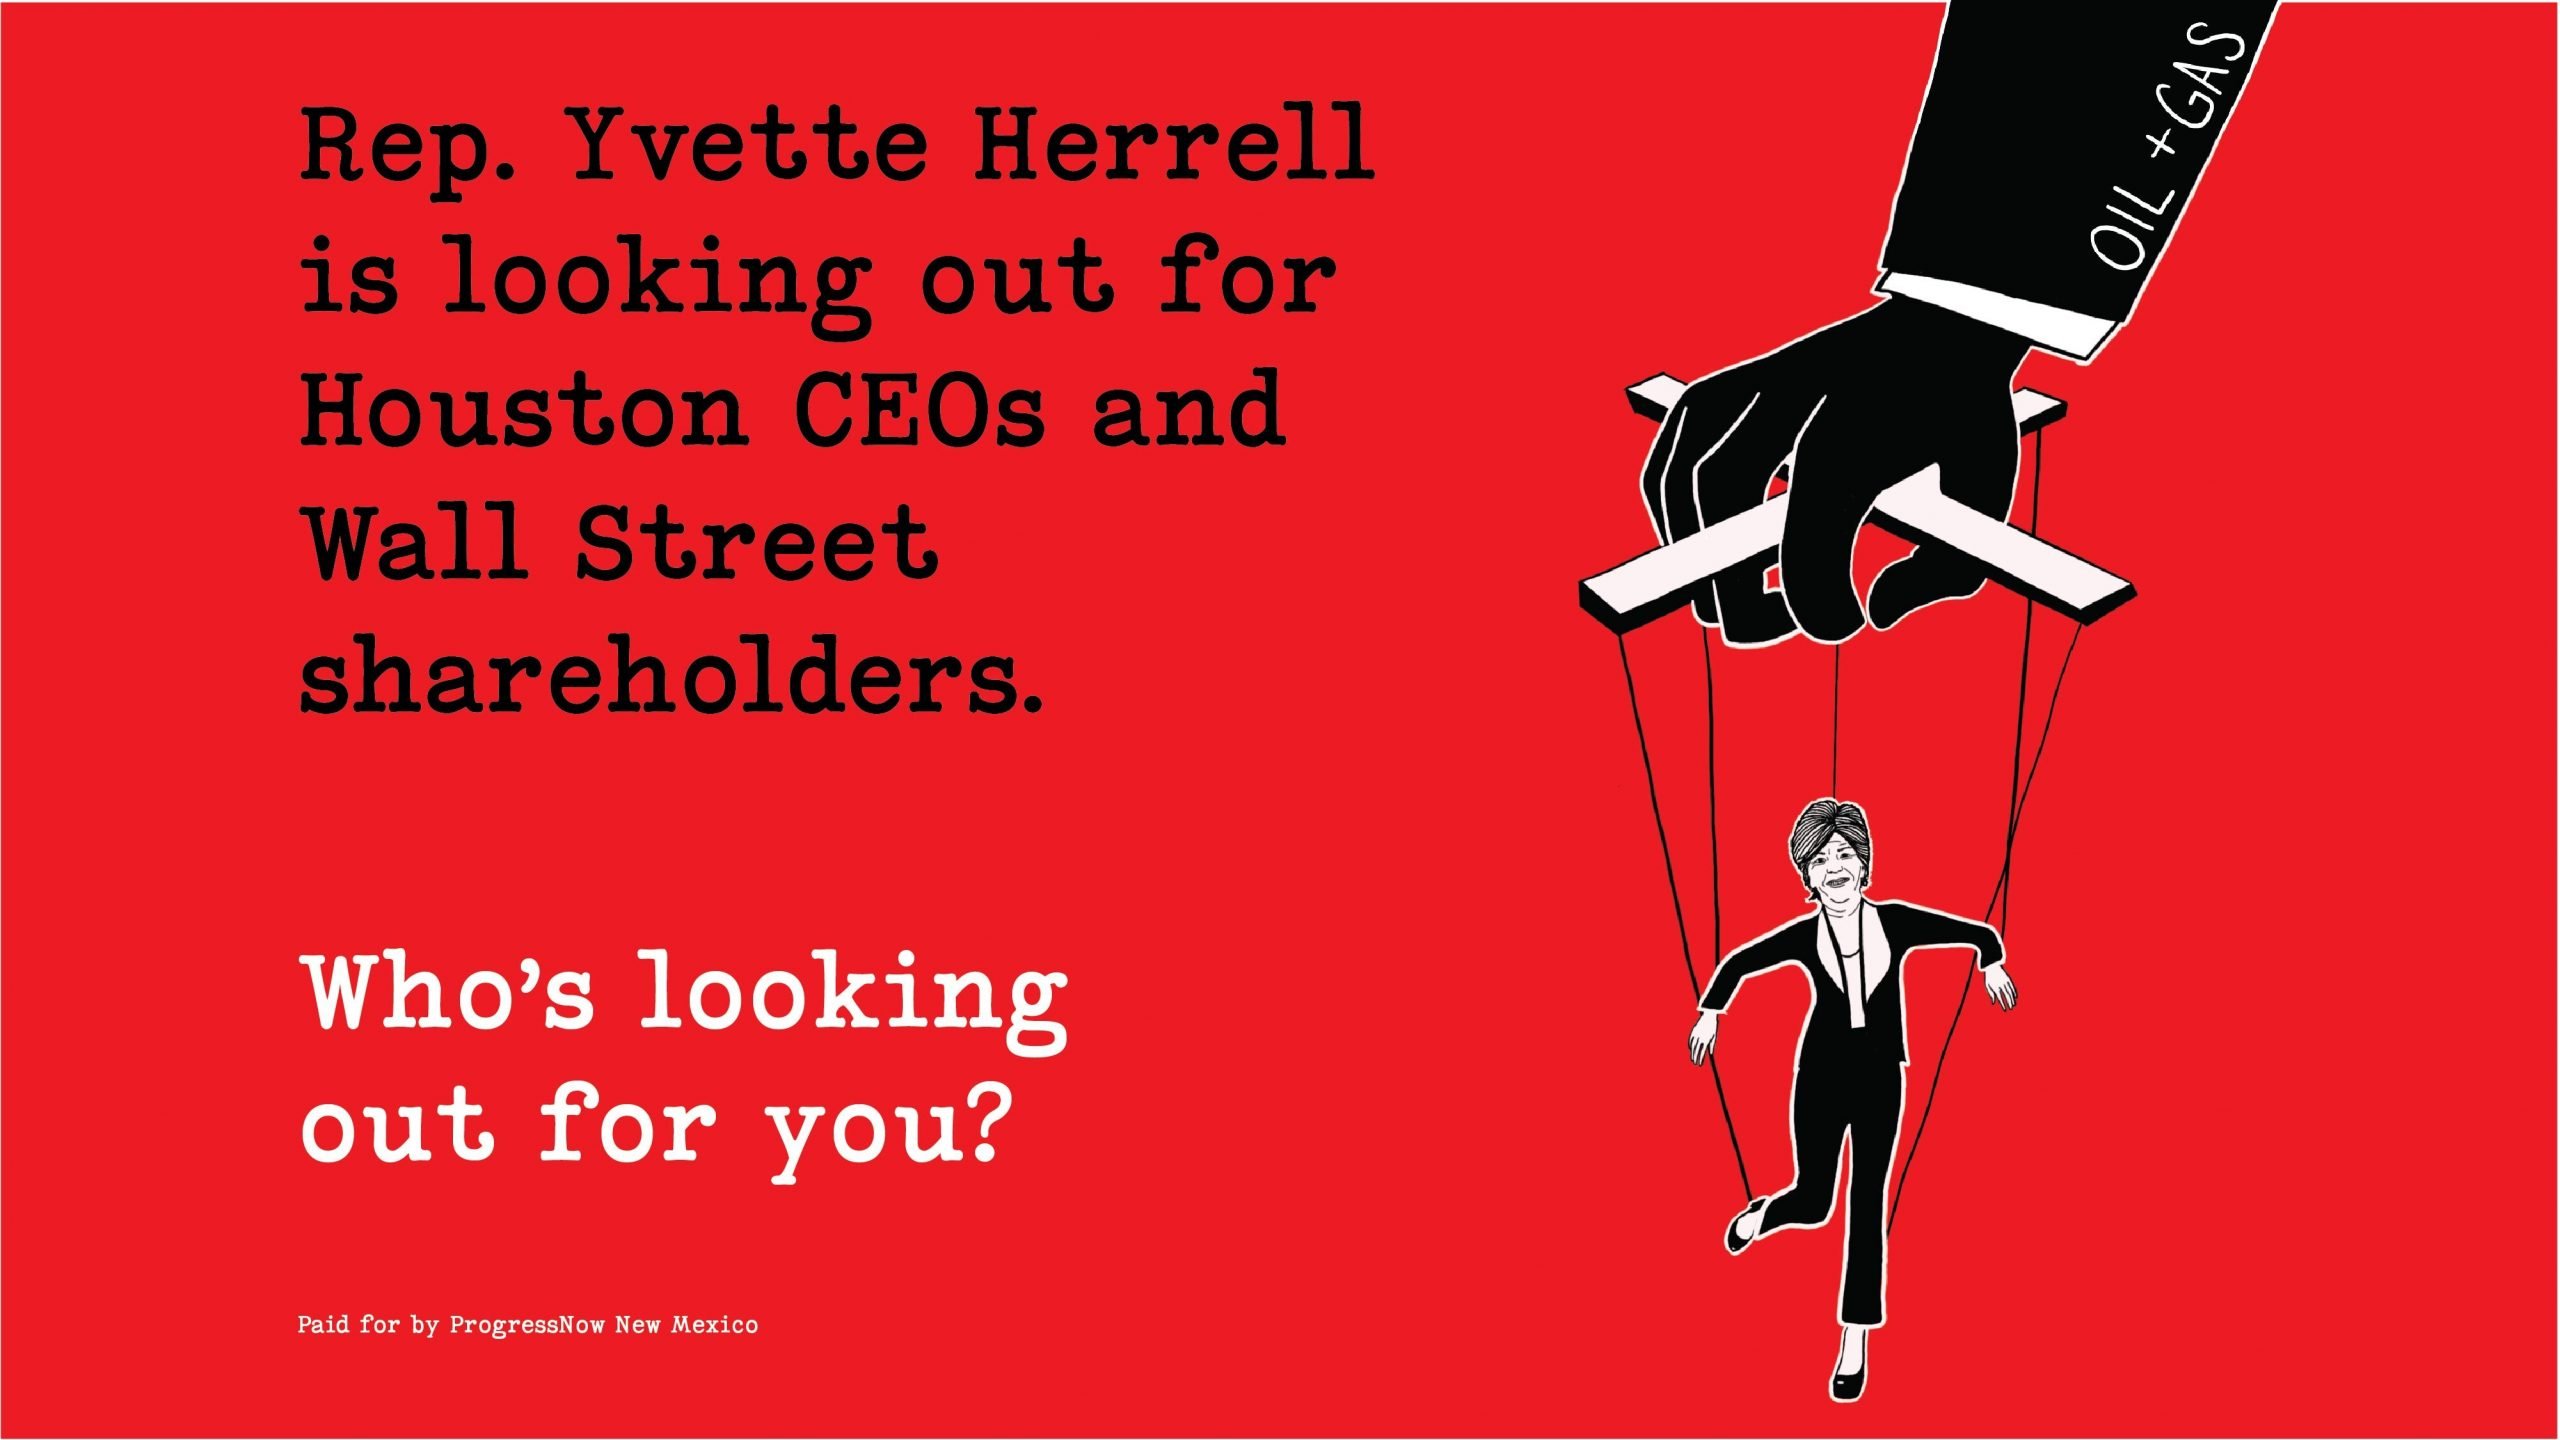 Who’s pulling Rep. Herrell’s strings?